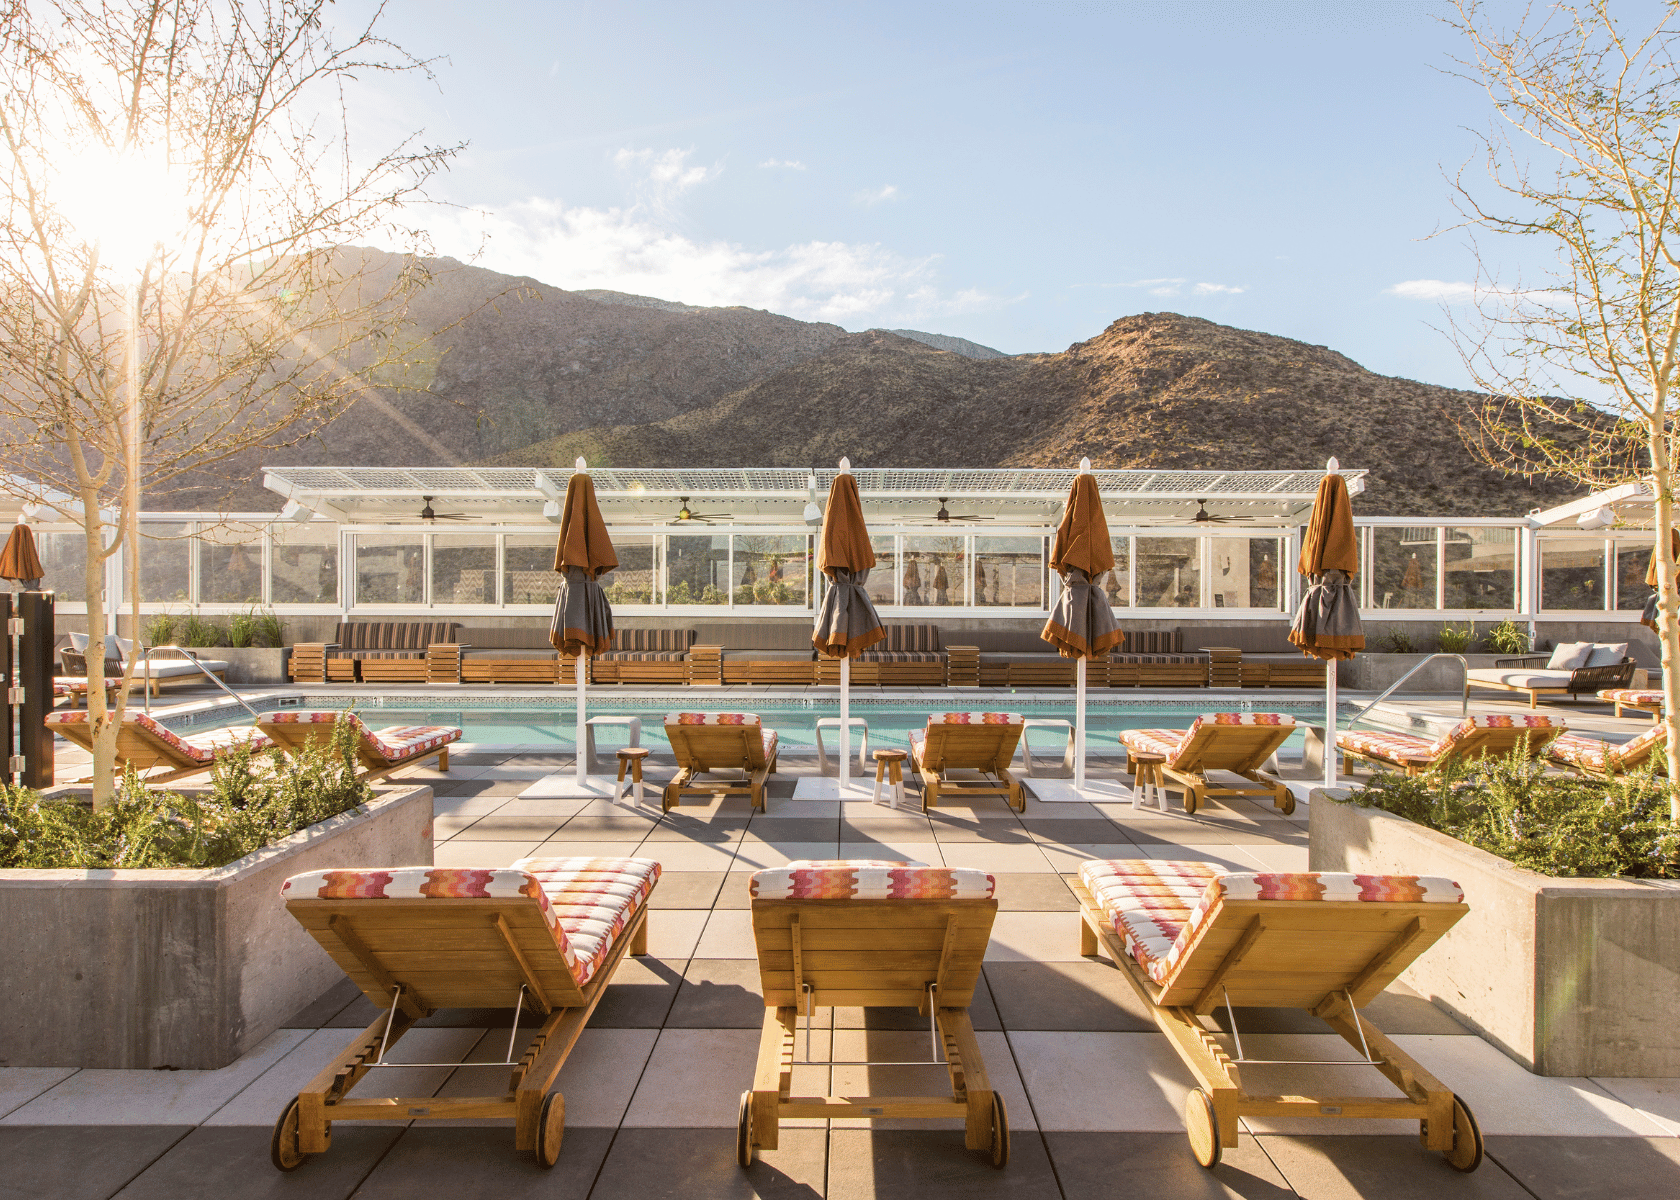 The Best Hotels in Palm Springs - Explore the Desert Oasis!